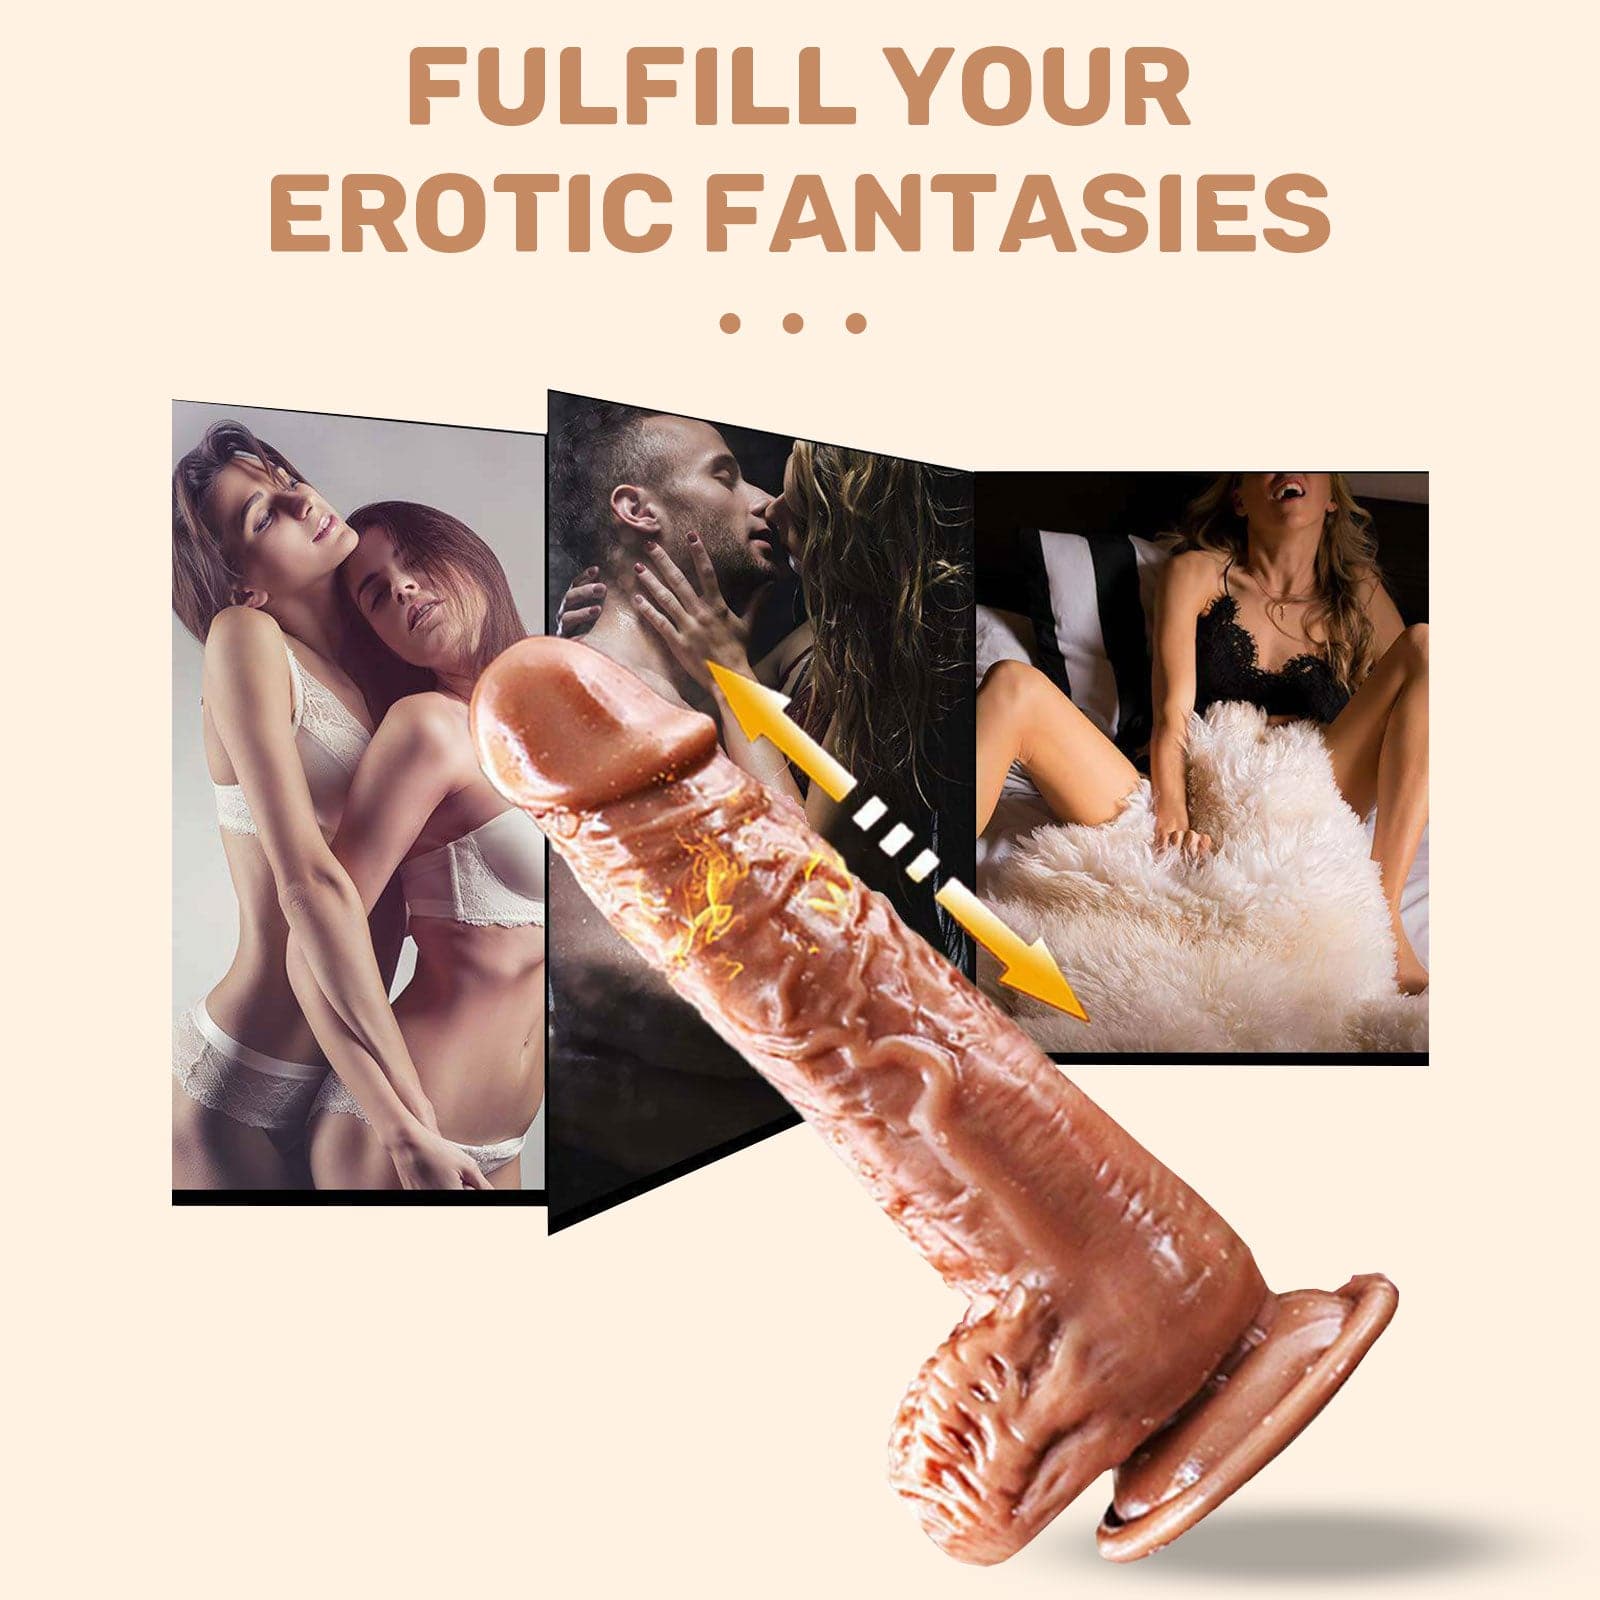 With remote control in automatic heating retractable dildo - 10 kinds of vibration